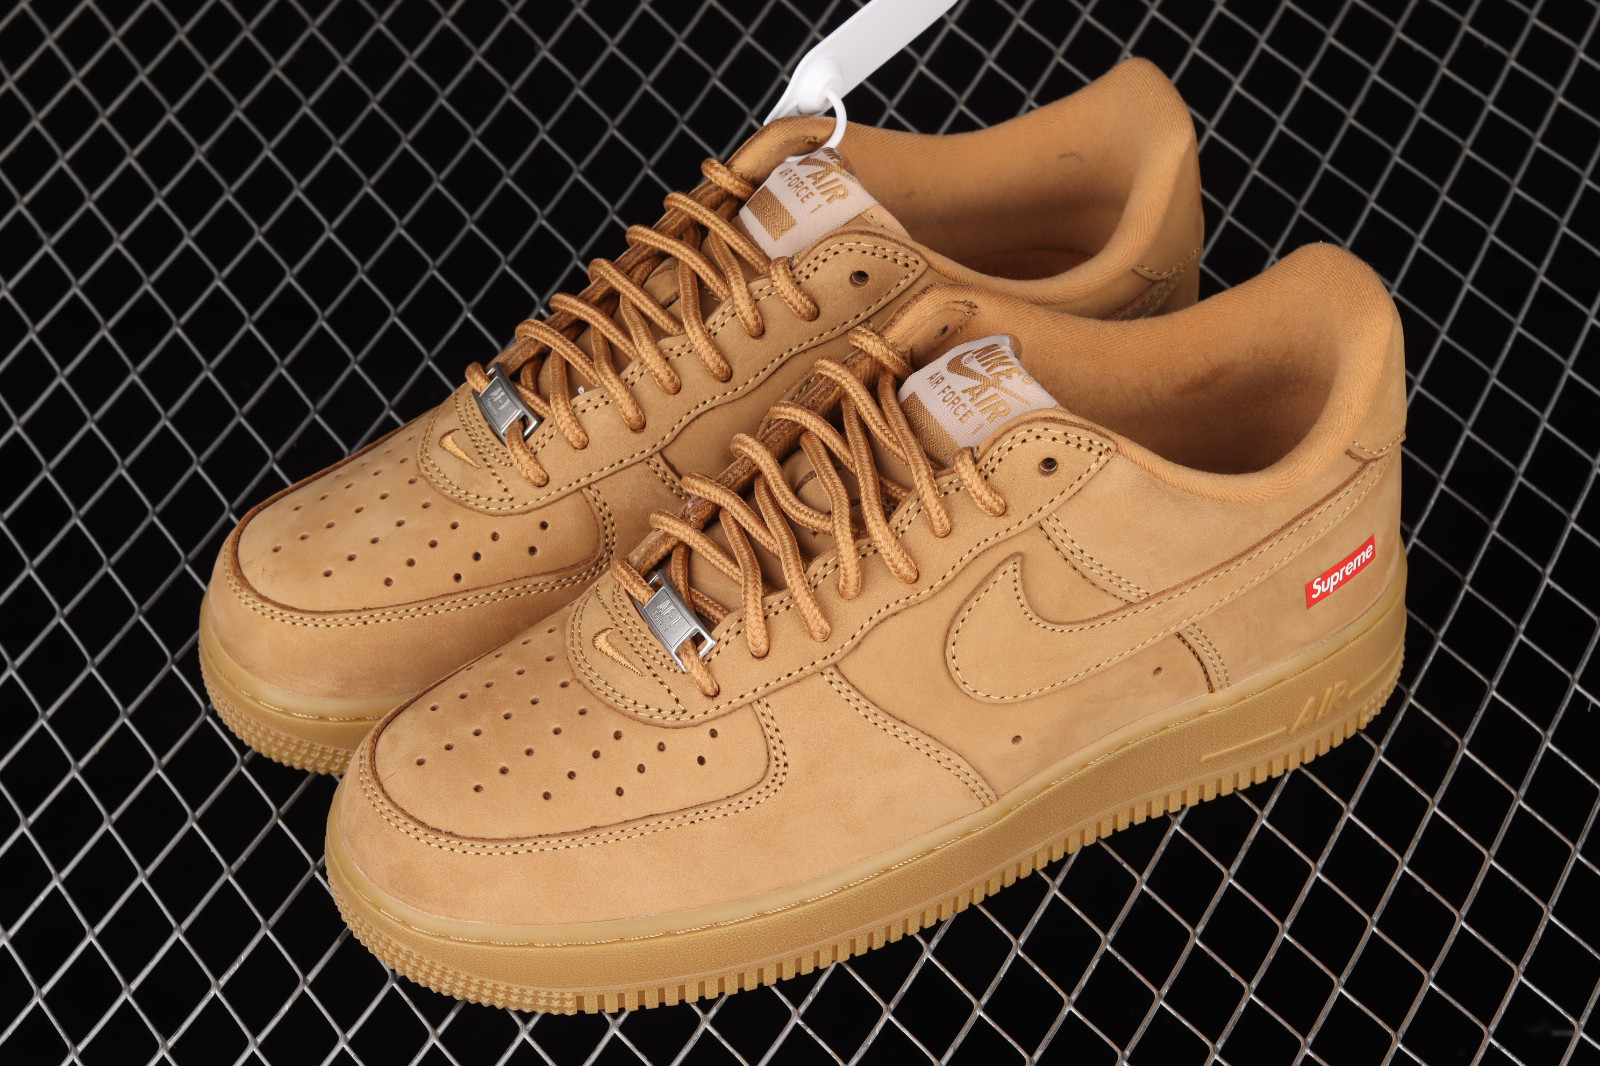 Supreme x Nike unique nike dunks youth shoes 2016 Wheat Suede